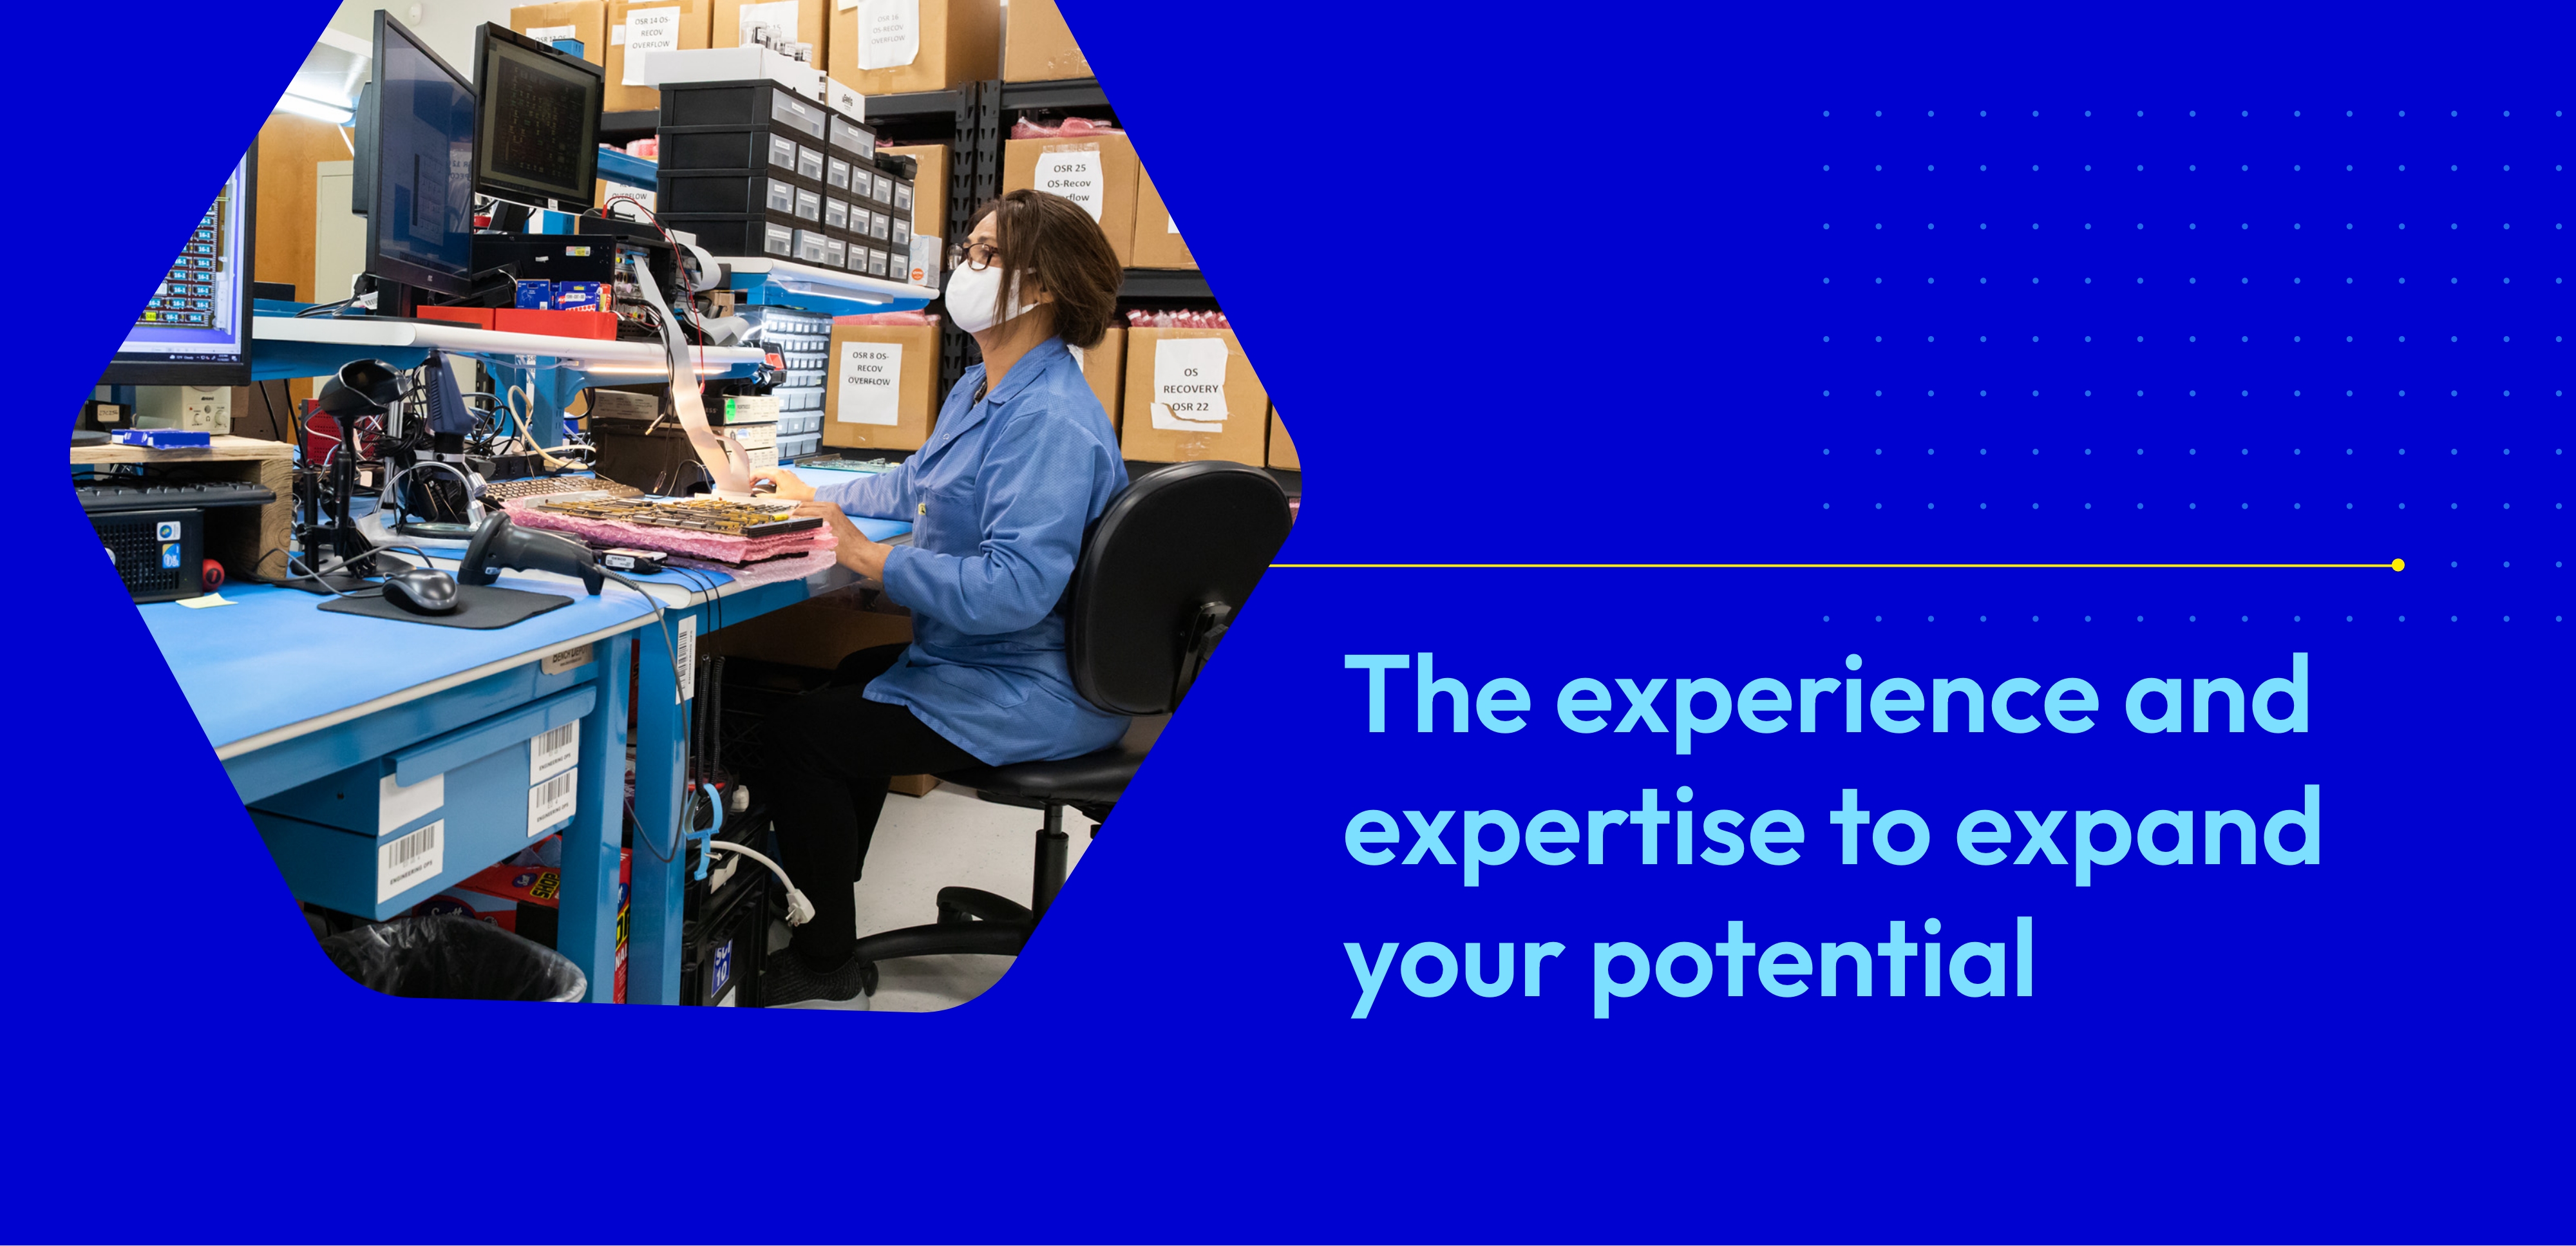 The experience and expertise to expand your potential